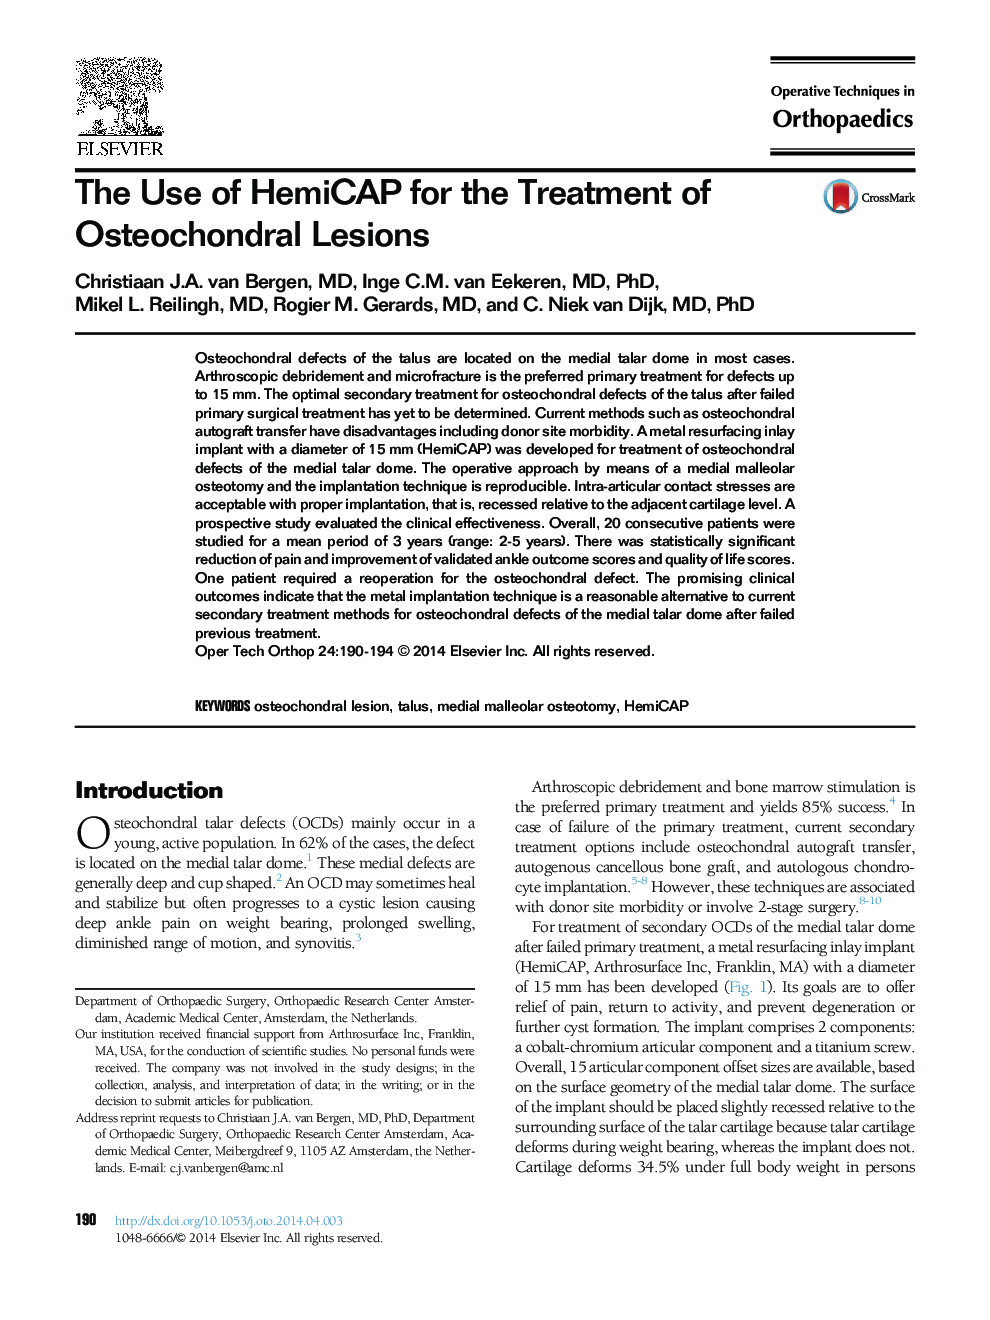 The Use of HemiCAP for the Treatment of Osteochondral Lesions 